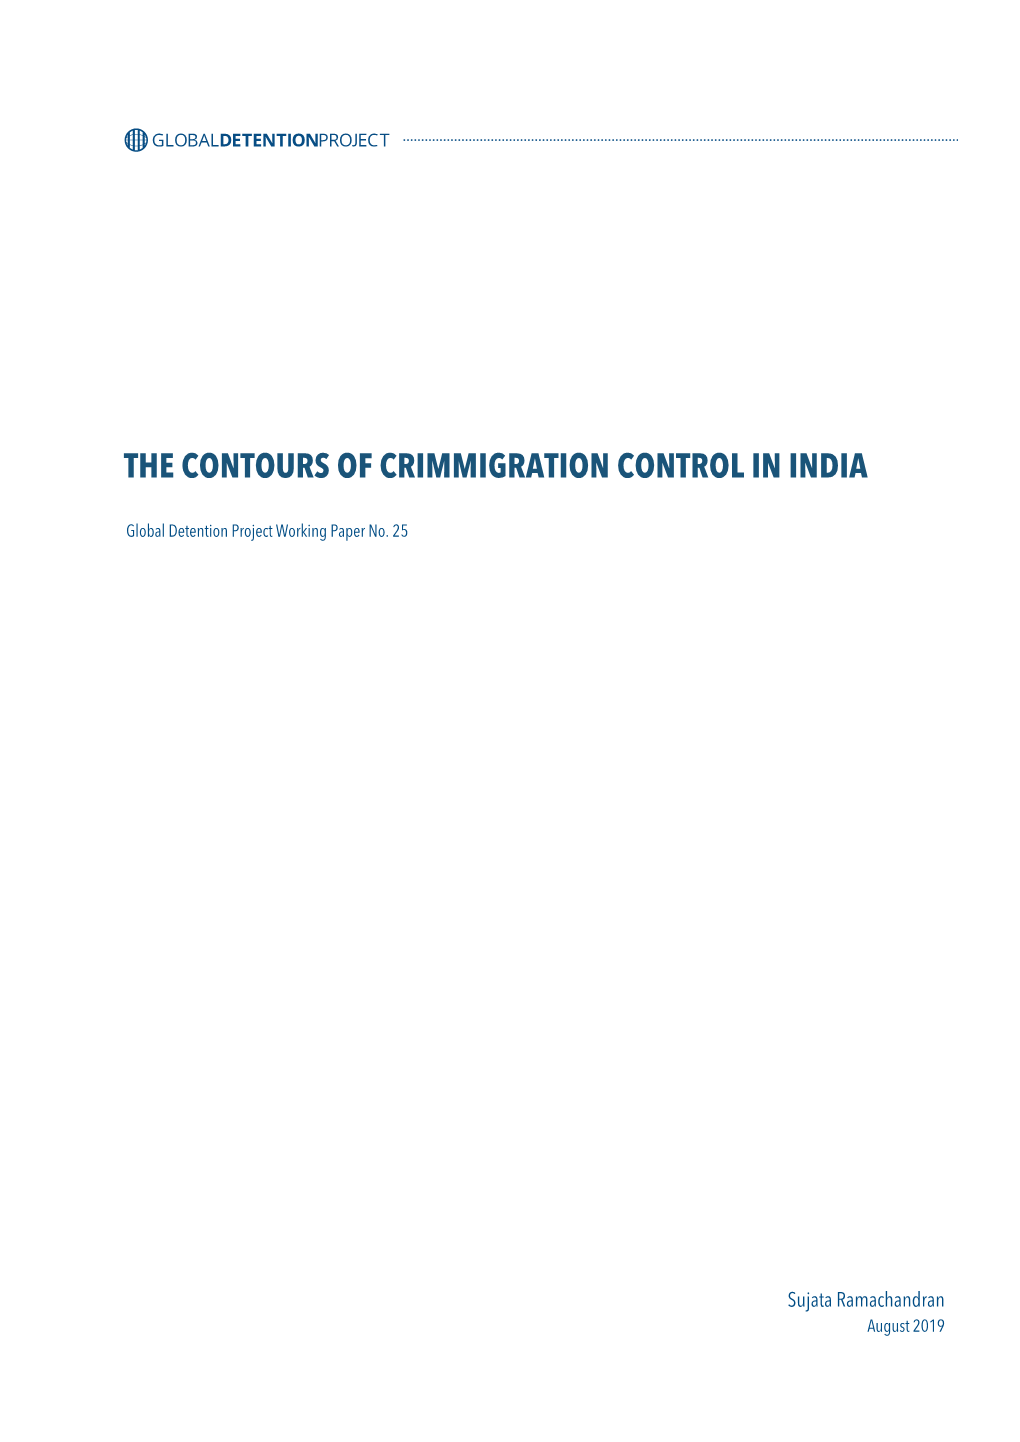 “The Contours of Crimmigration Control in India,” Global Detention